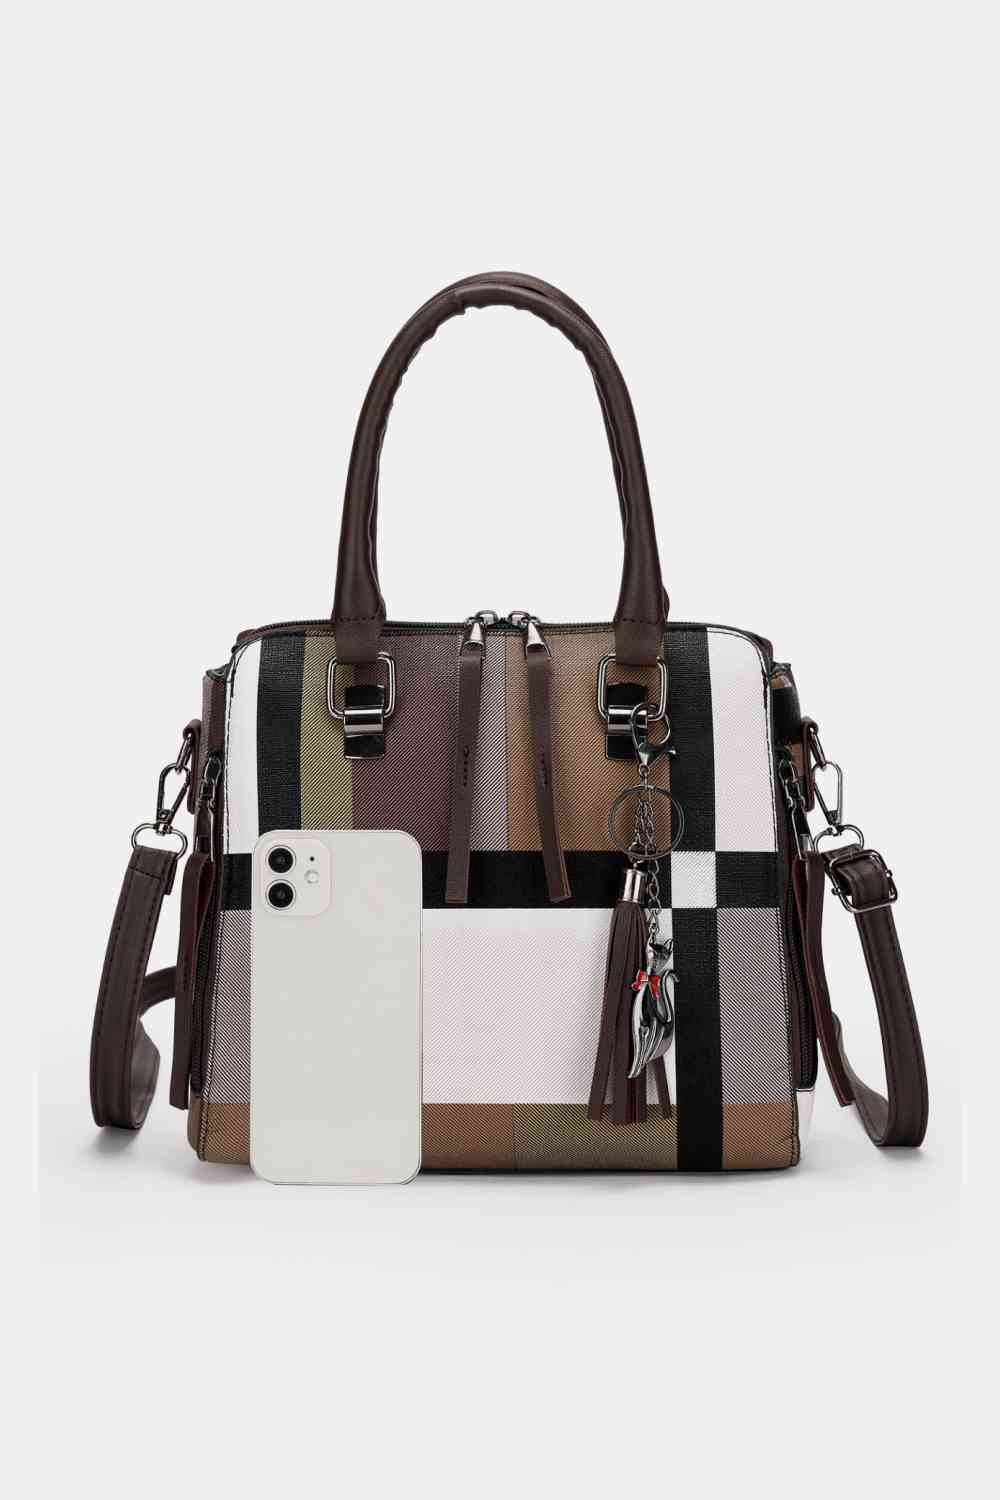 4-Piece Color Block PU Leather Bag Set at Kamakhyaa by Trendsi. This item is Bags, Ship From Overseas, Trendsi, Y.P